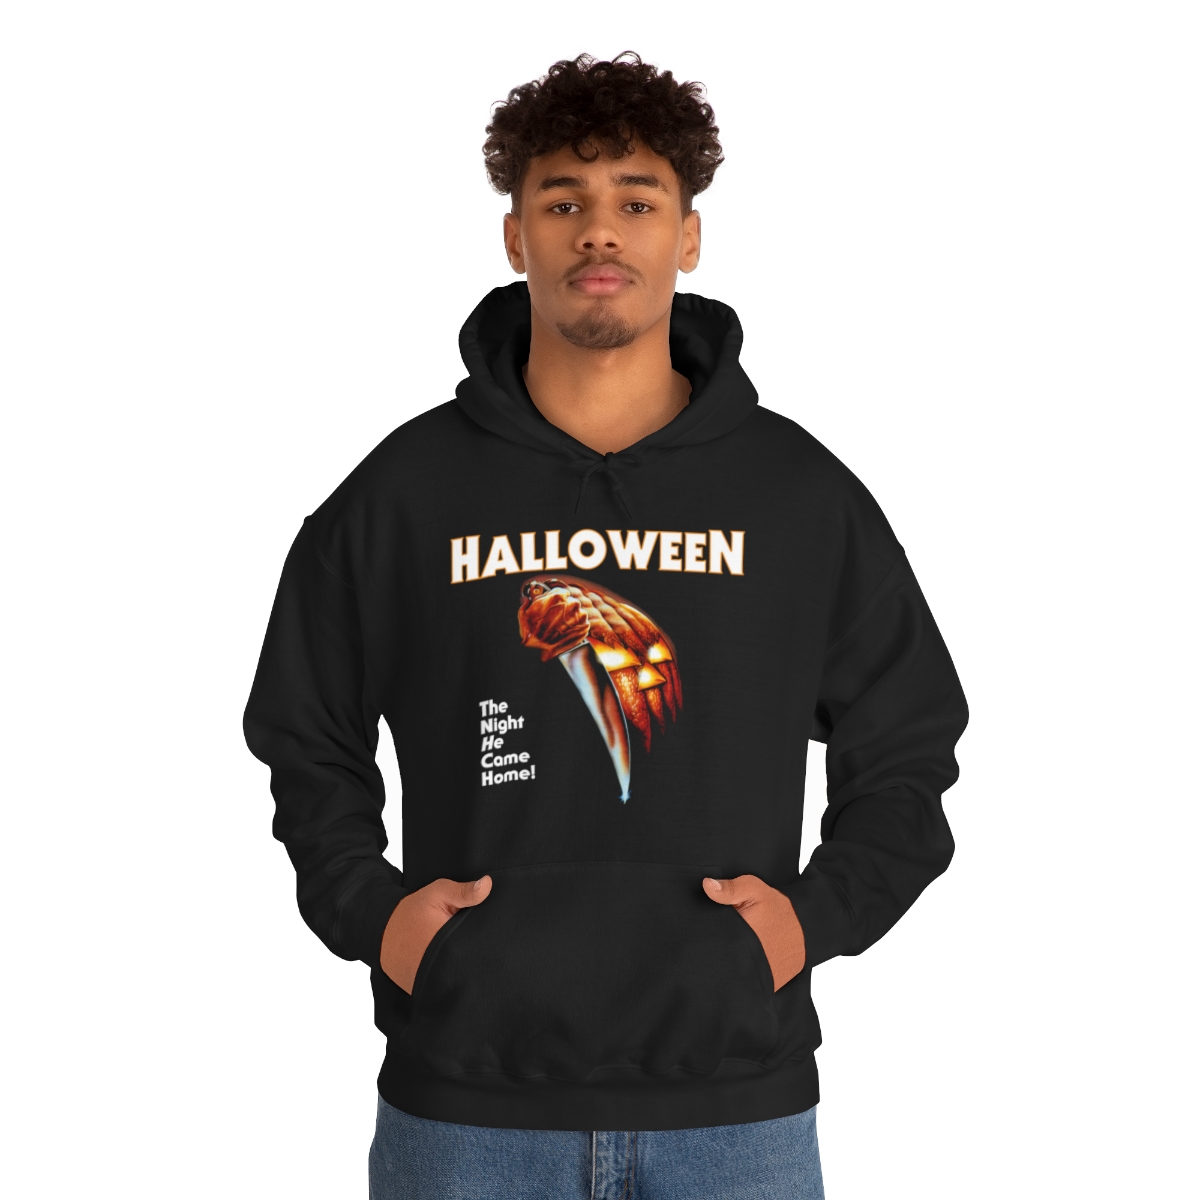 Halloween 1978 Movie Poster with Michael Myers Mask on Back Pullover ...